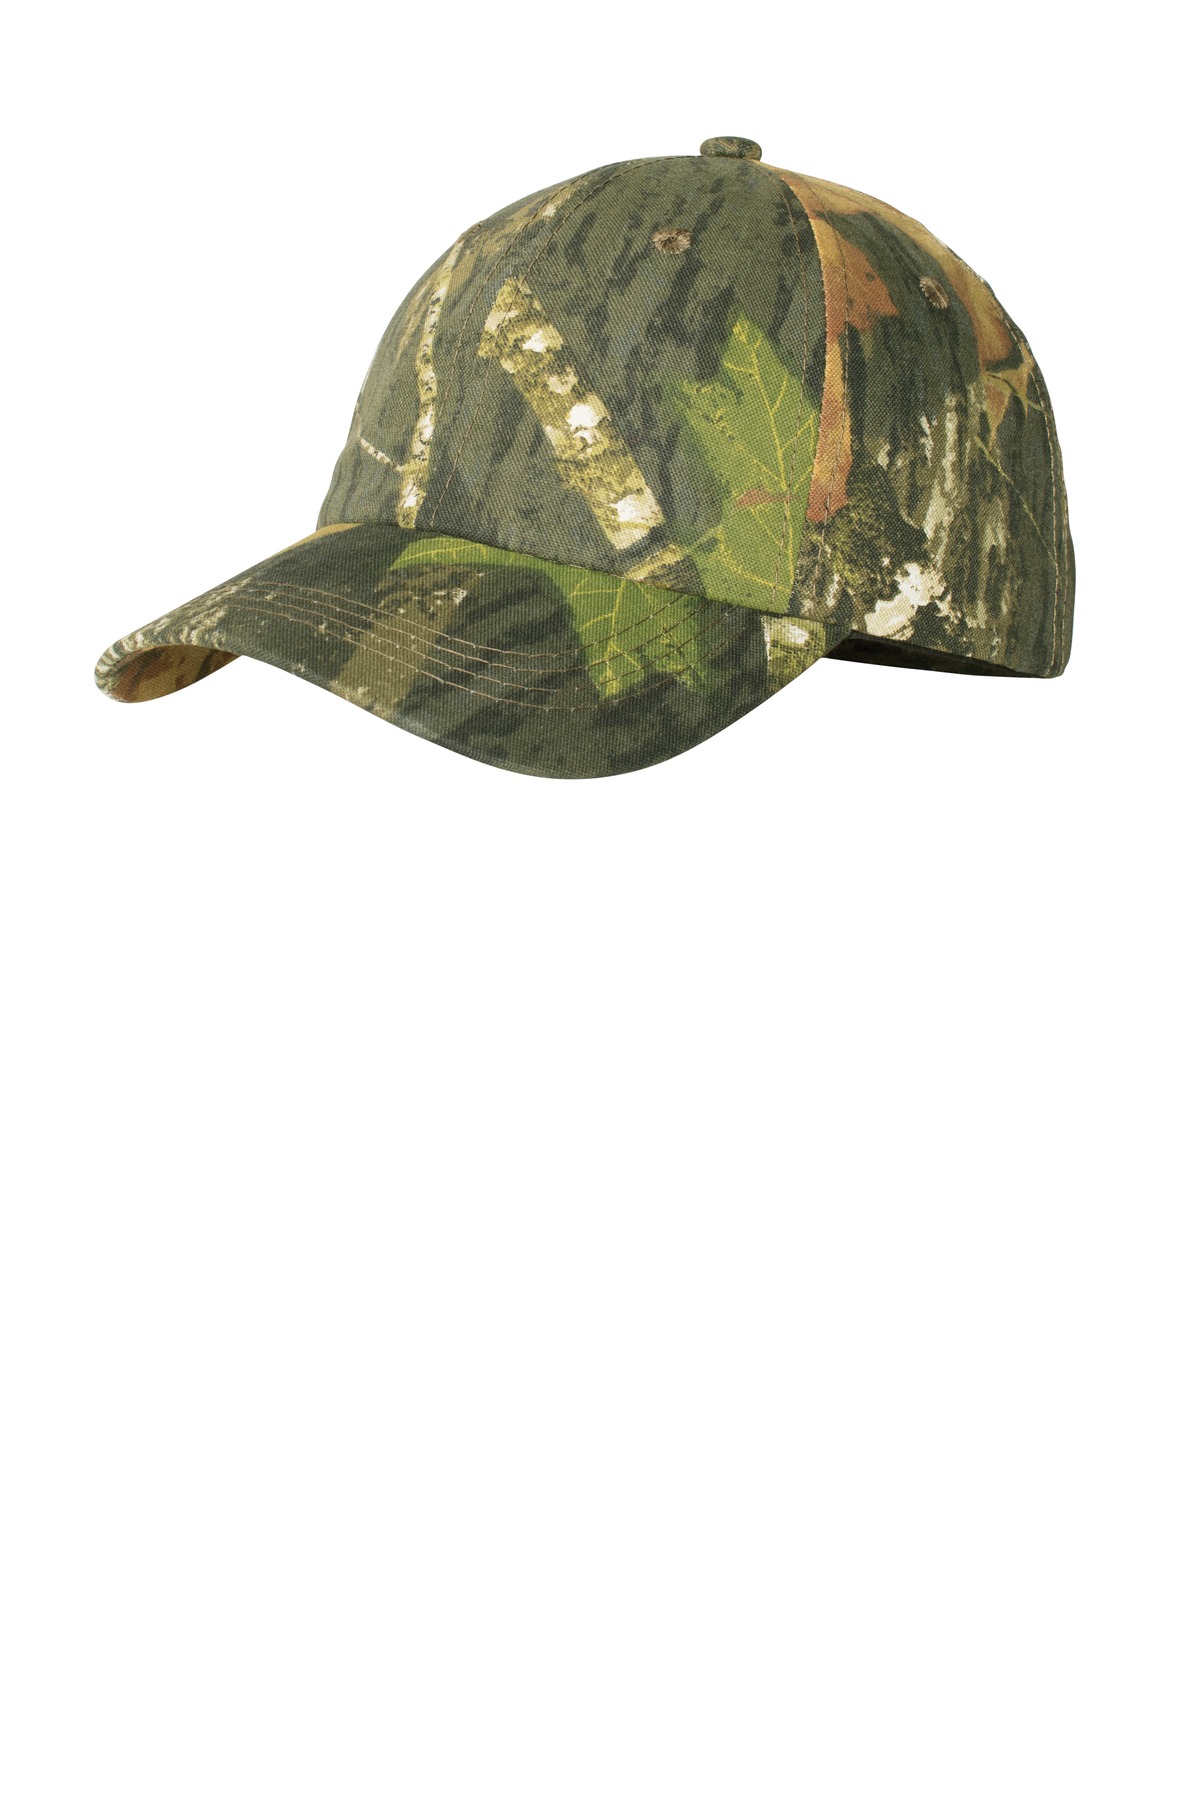 Port Authority Pro Camouflage Series Garment-Washed Cap-Port Authority